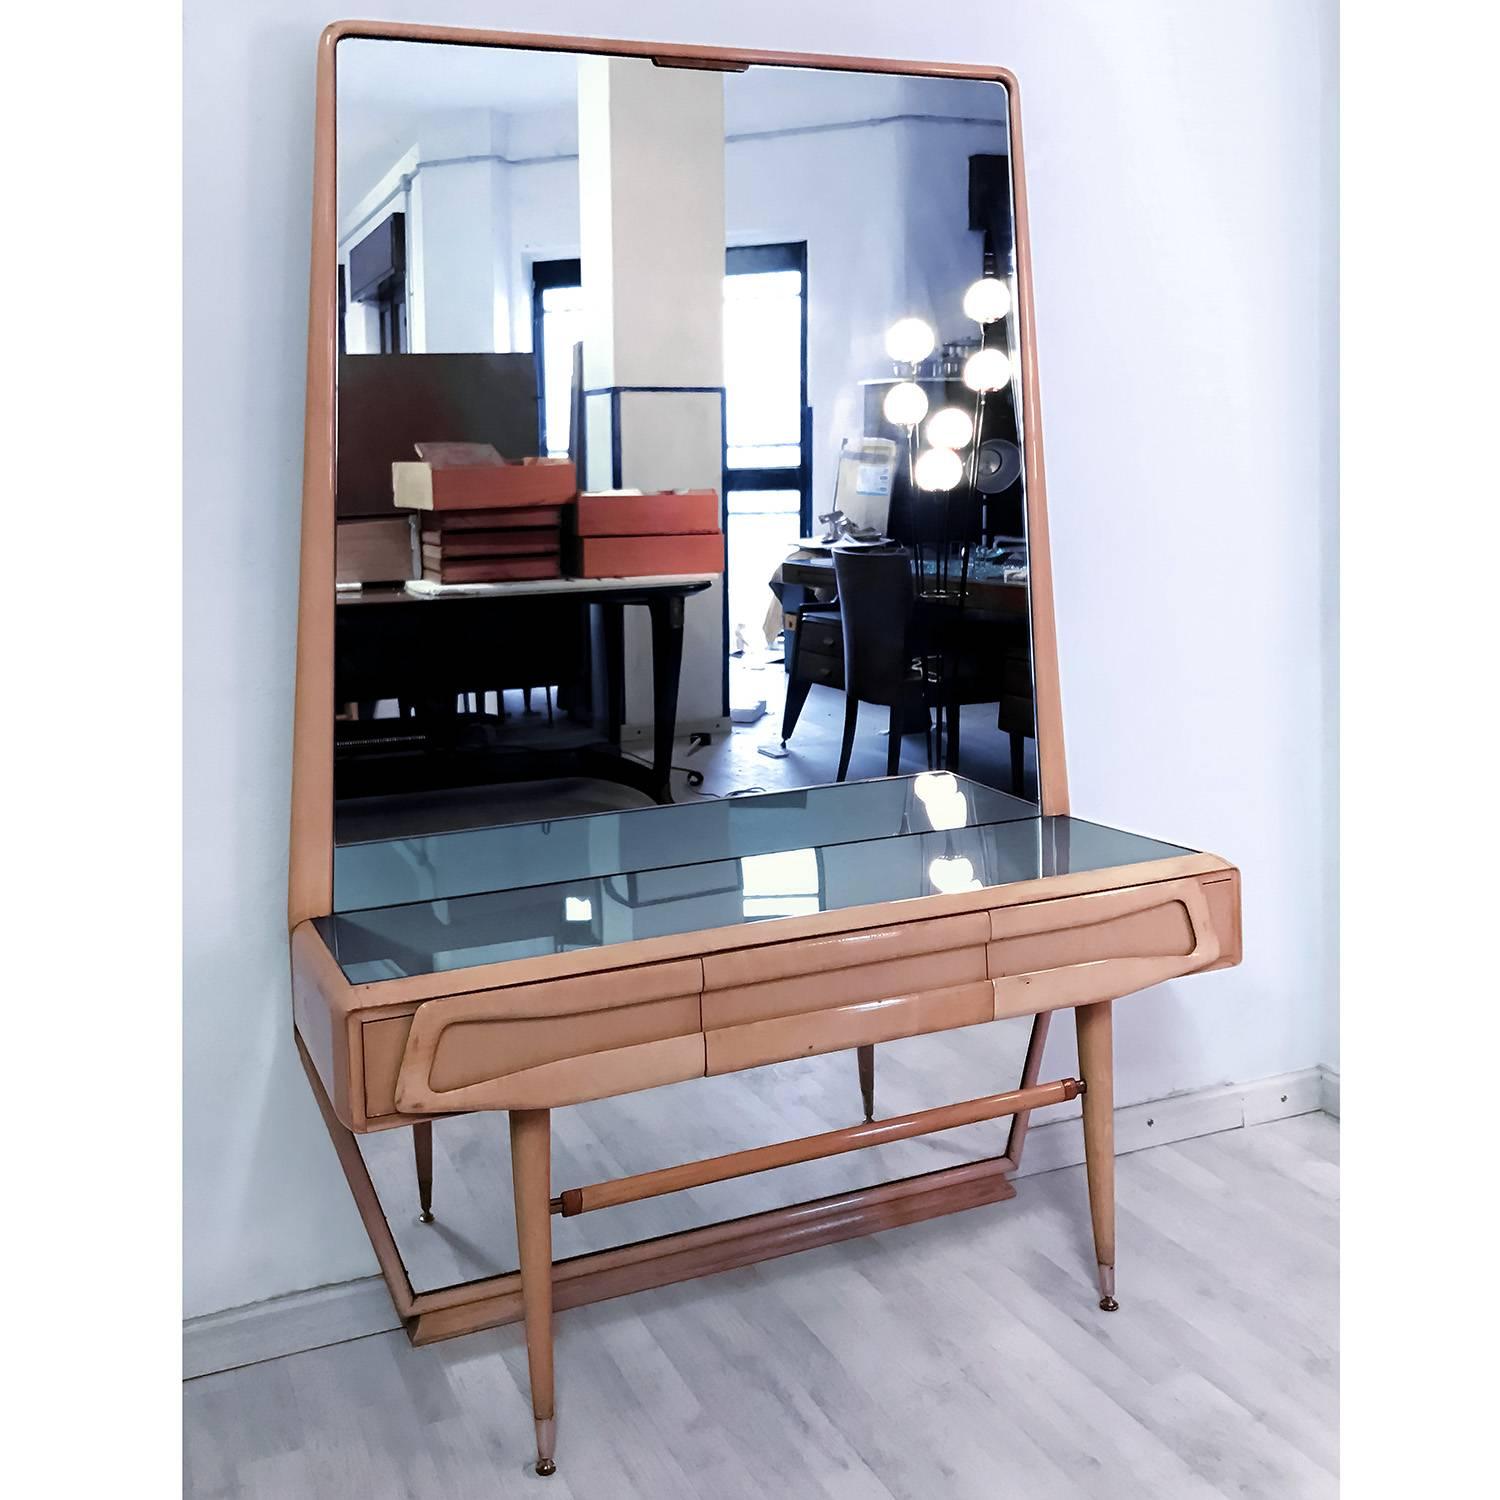 The design of this so amazing maple vanity dresser is attributed to Silvio Cavatorta in the 1950s, characterized by a catchy sculptural design with vertical mirror that has a special trapezoidal shape.

Its uniqueness is given also by the structure,